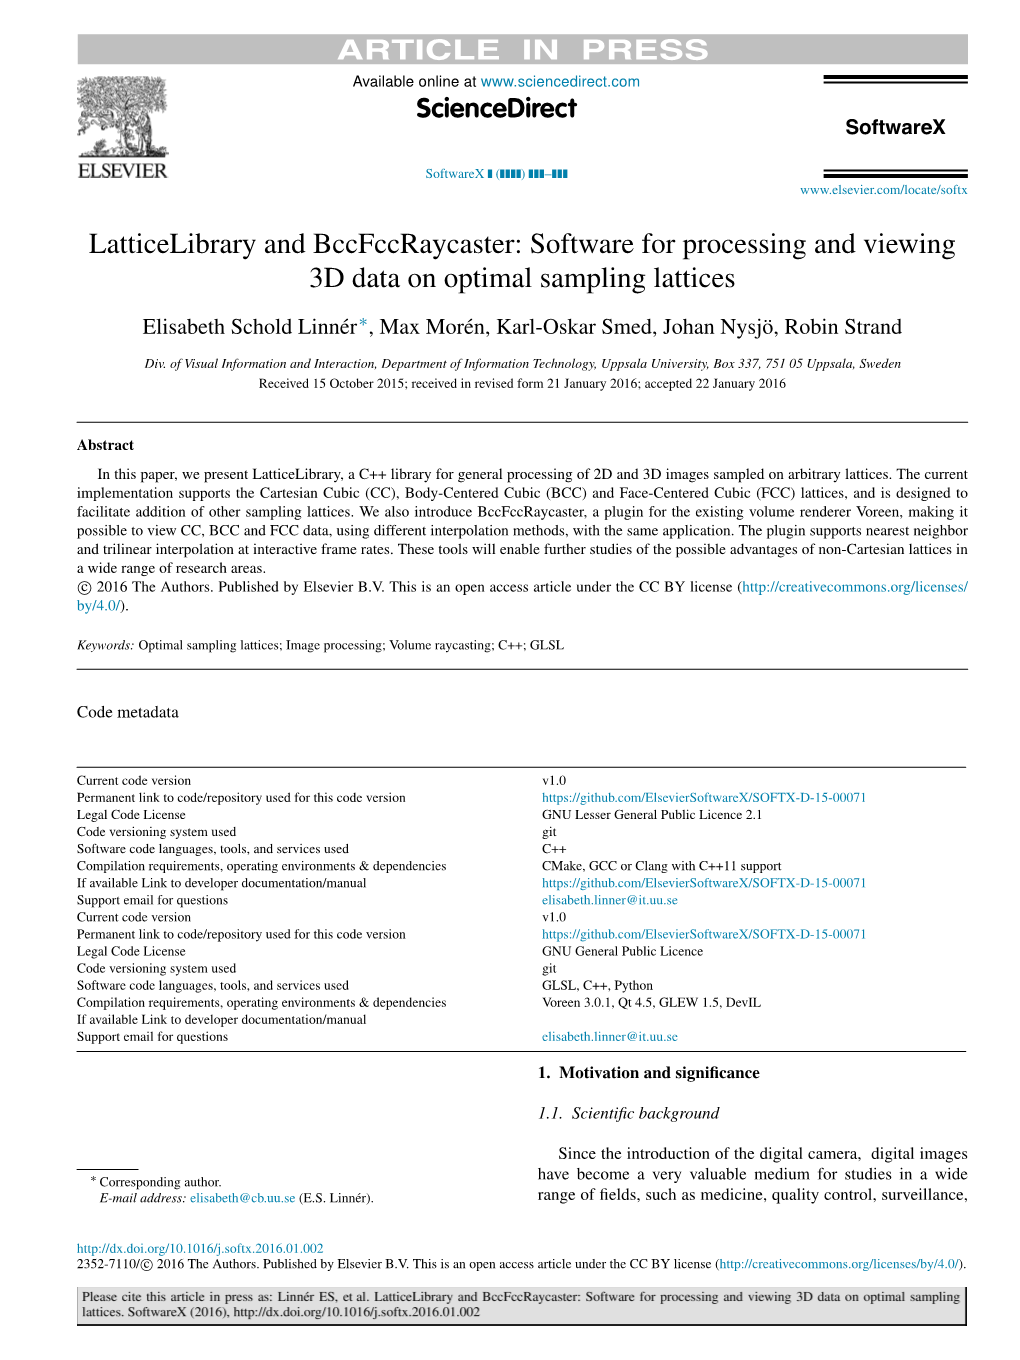 Software for Processing and Viewing 3D Data on Optimal Sampling Lattices